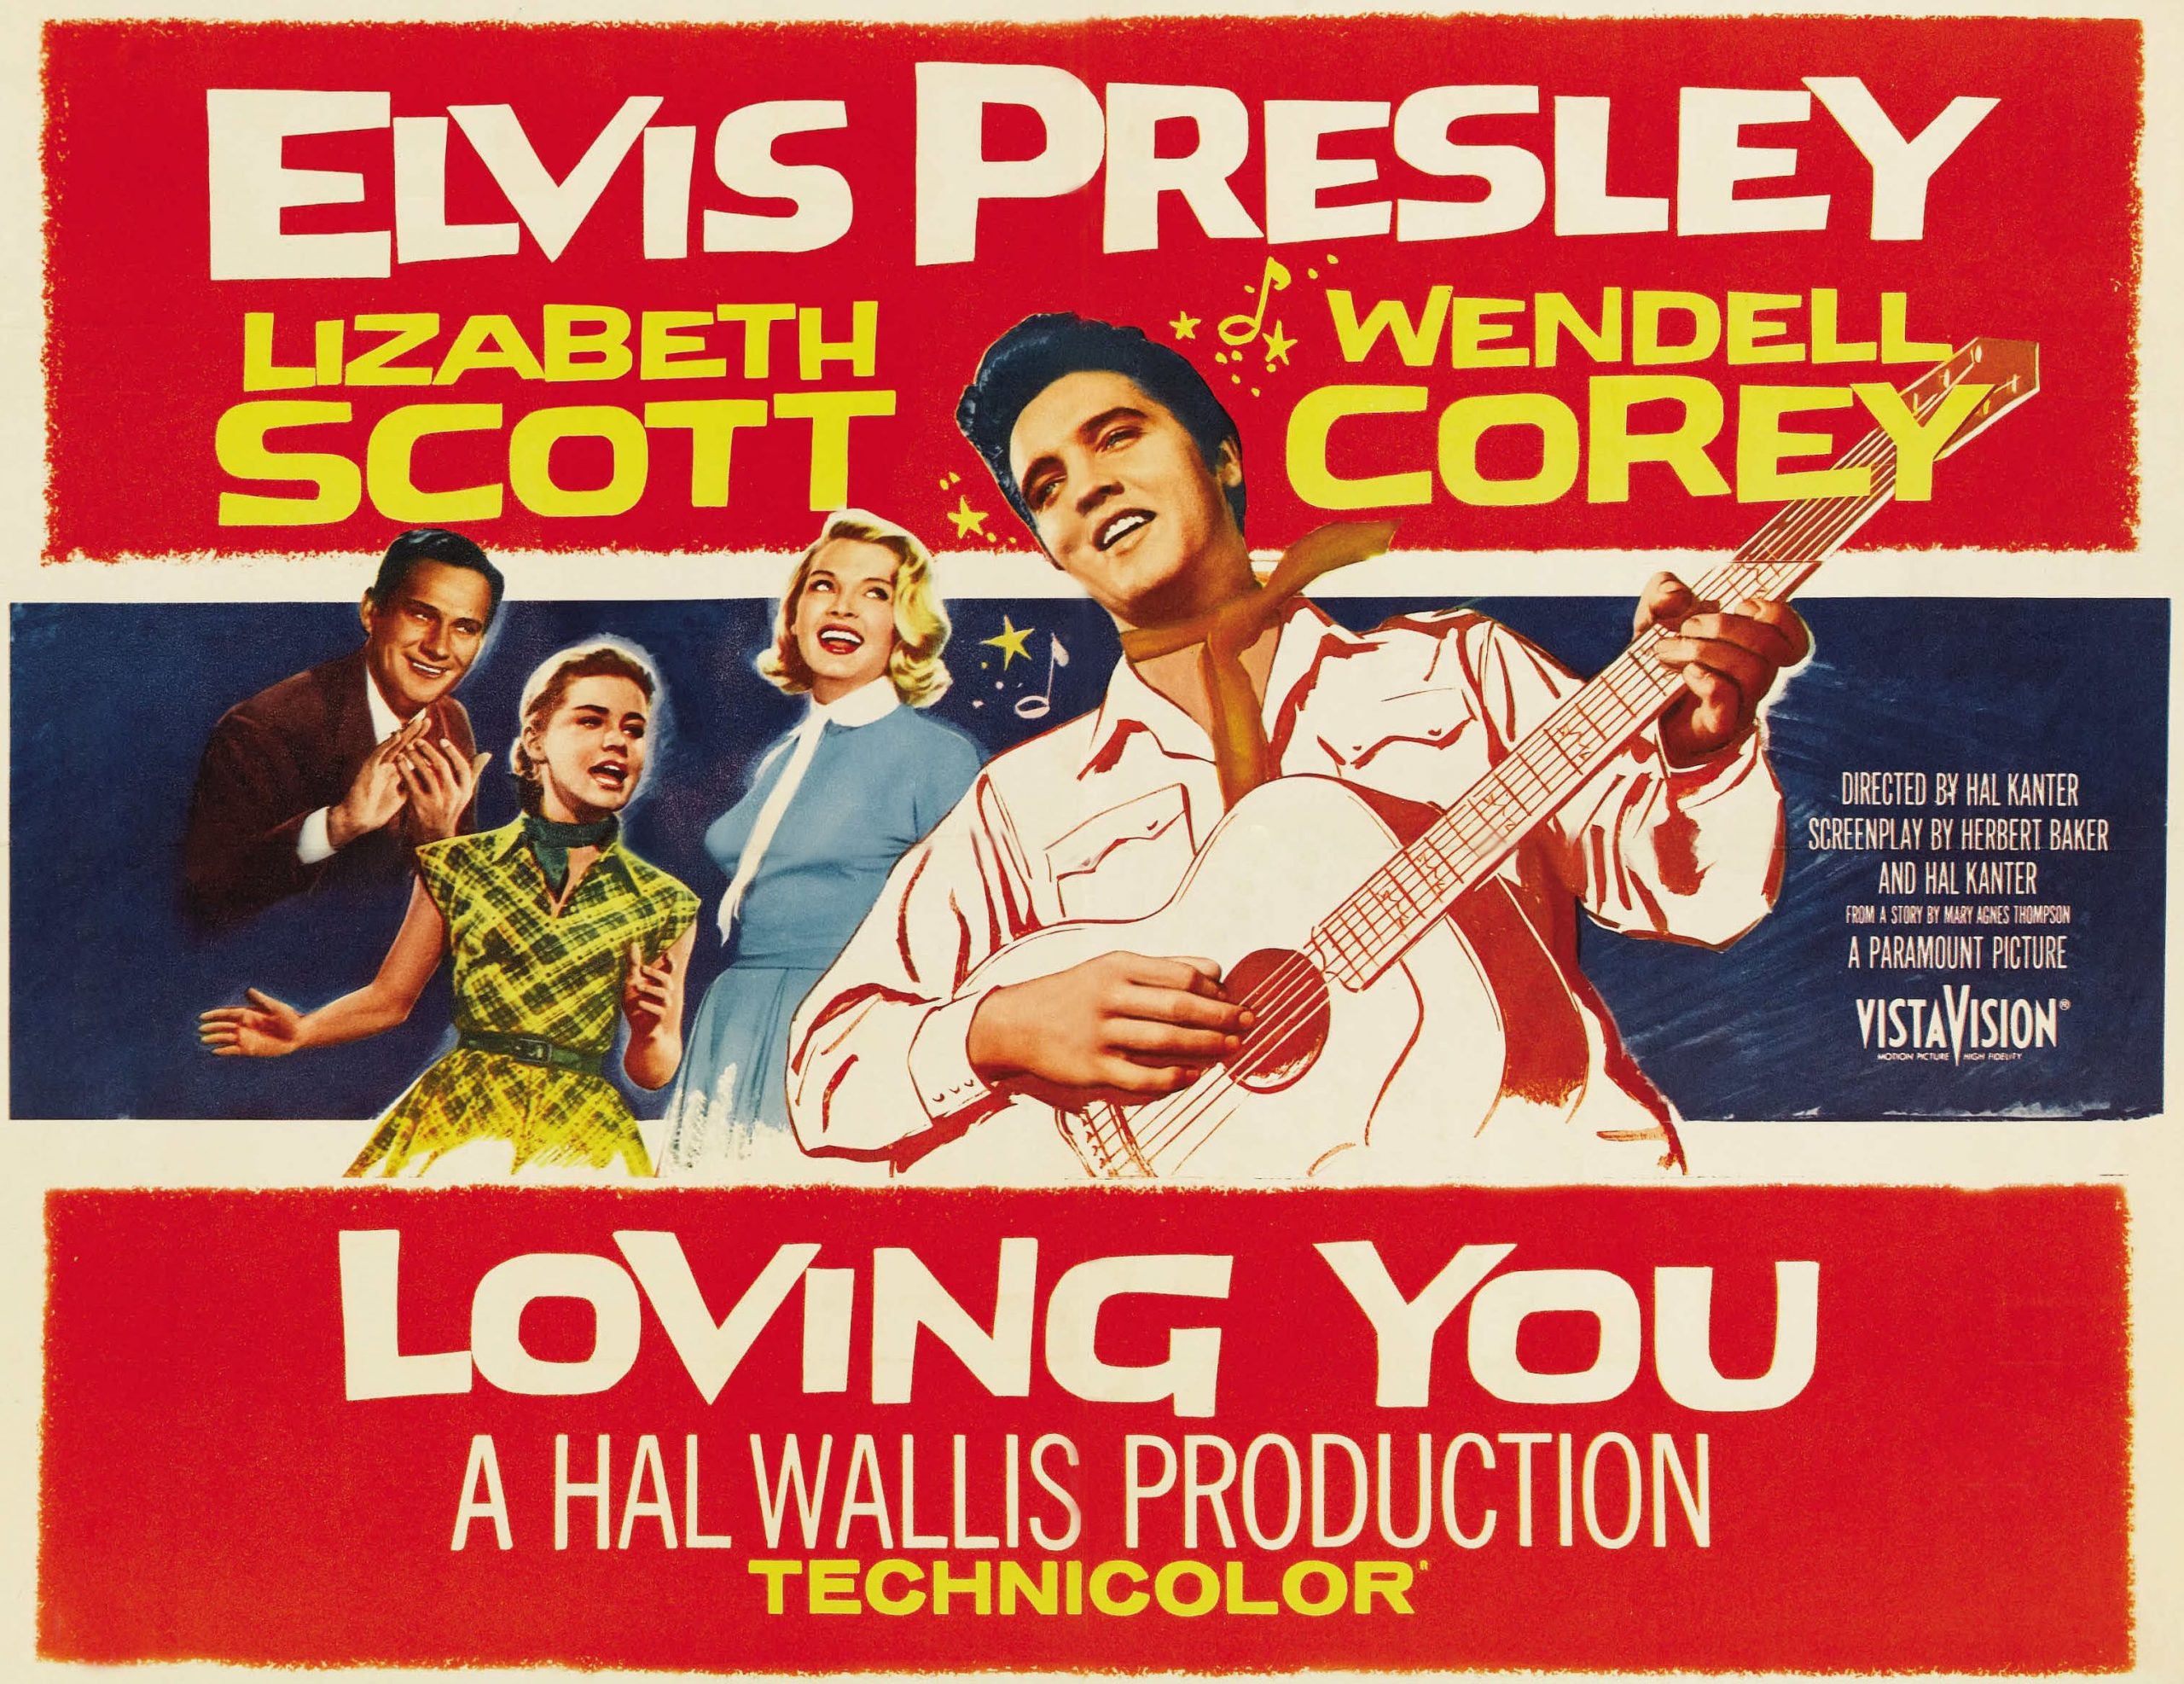 An advertisement for the Elvis Presley movie Loving You